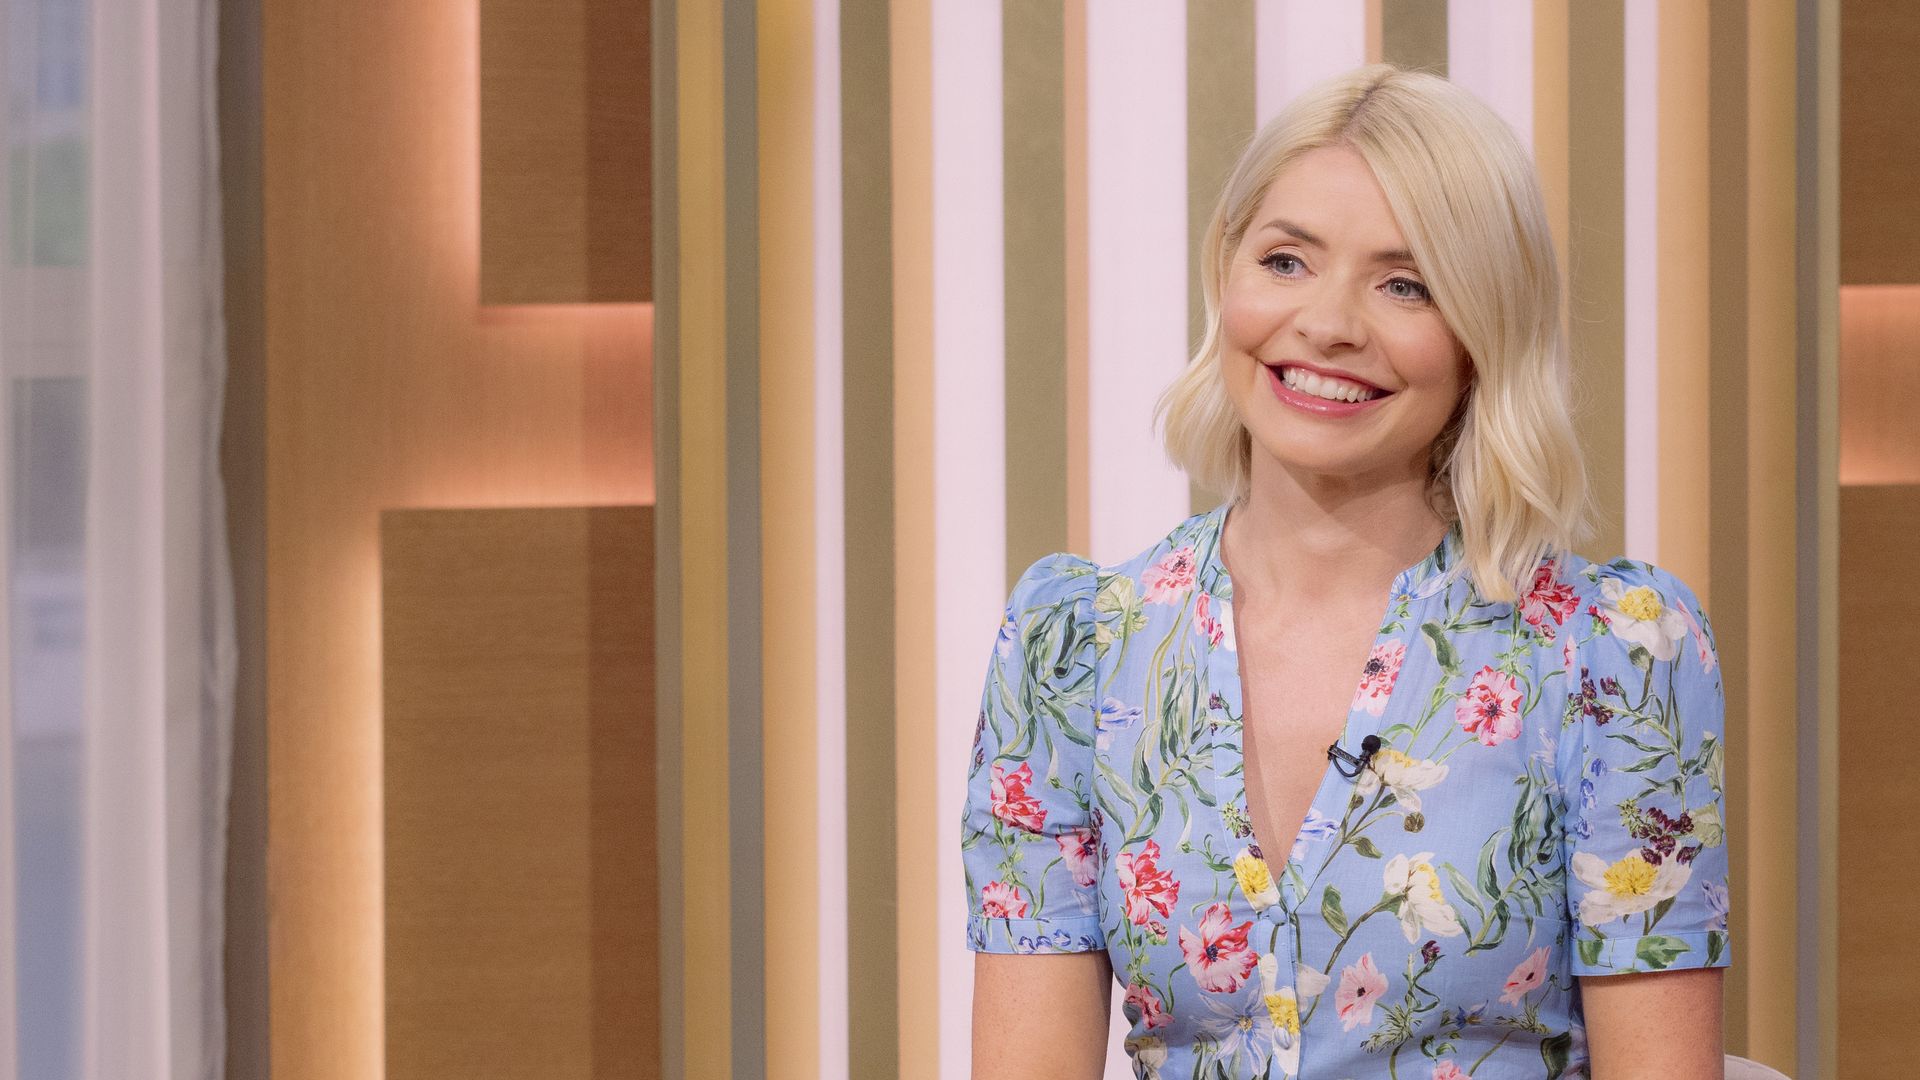 Holly Willoughby on 'This Morning'